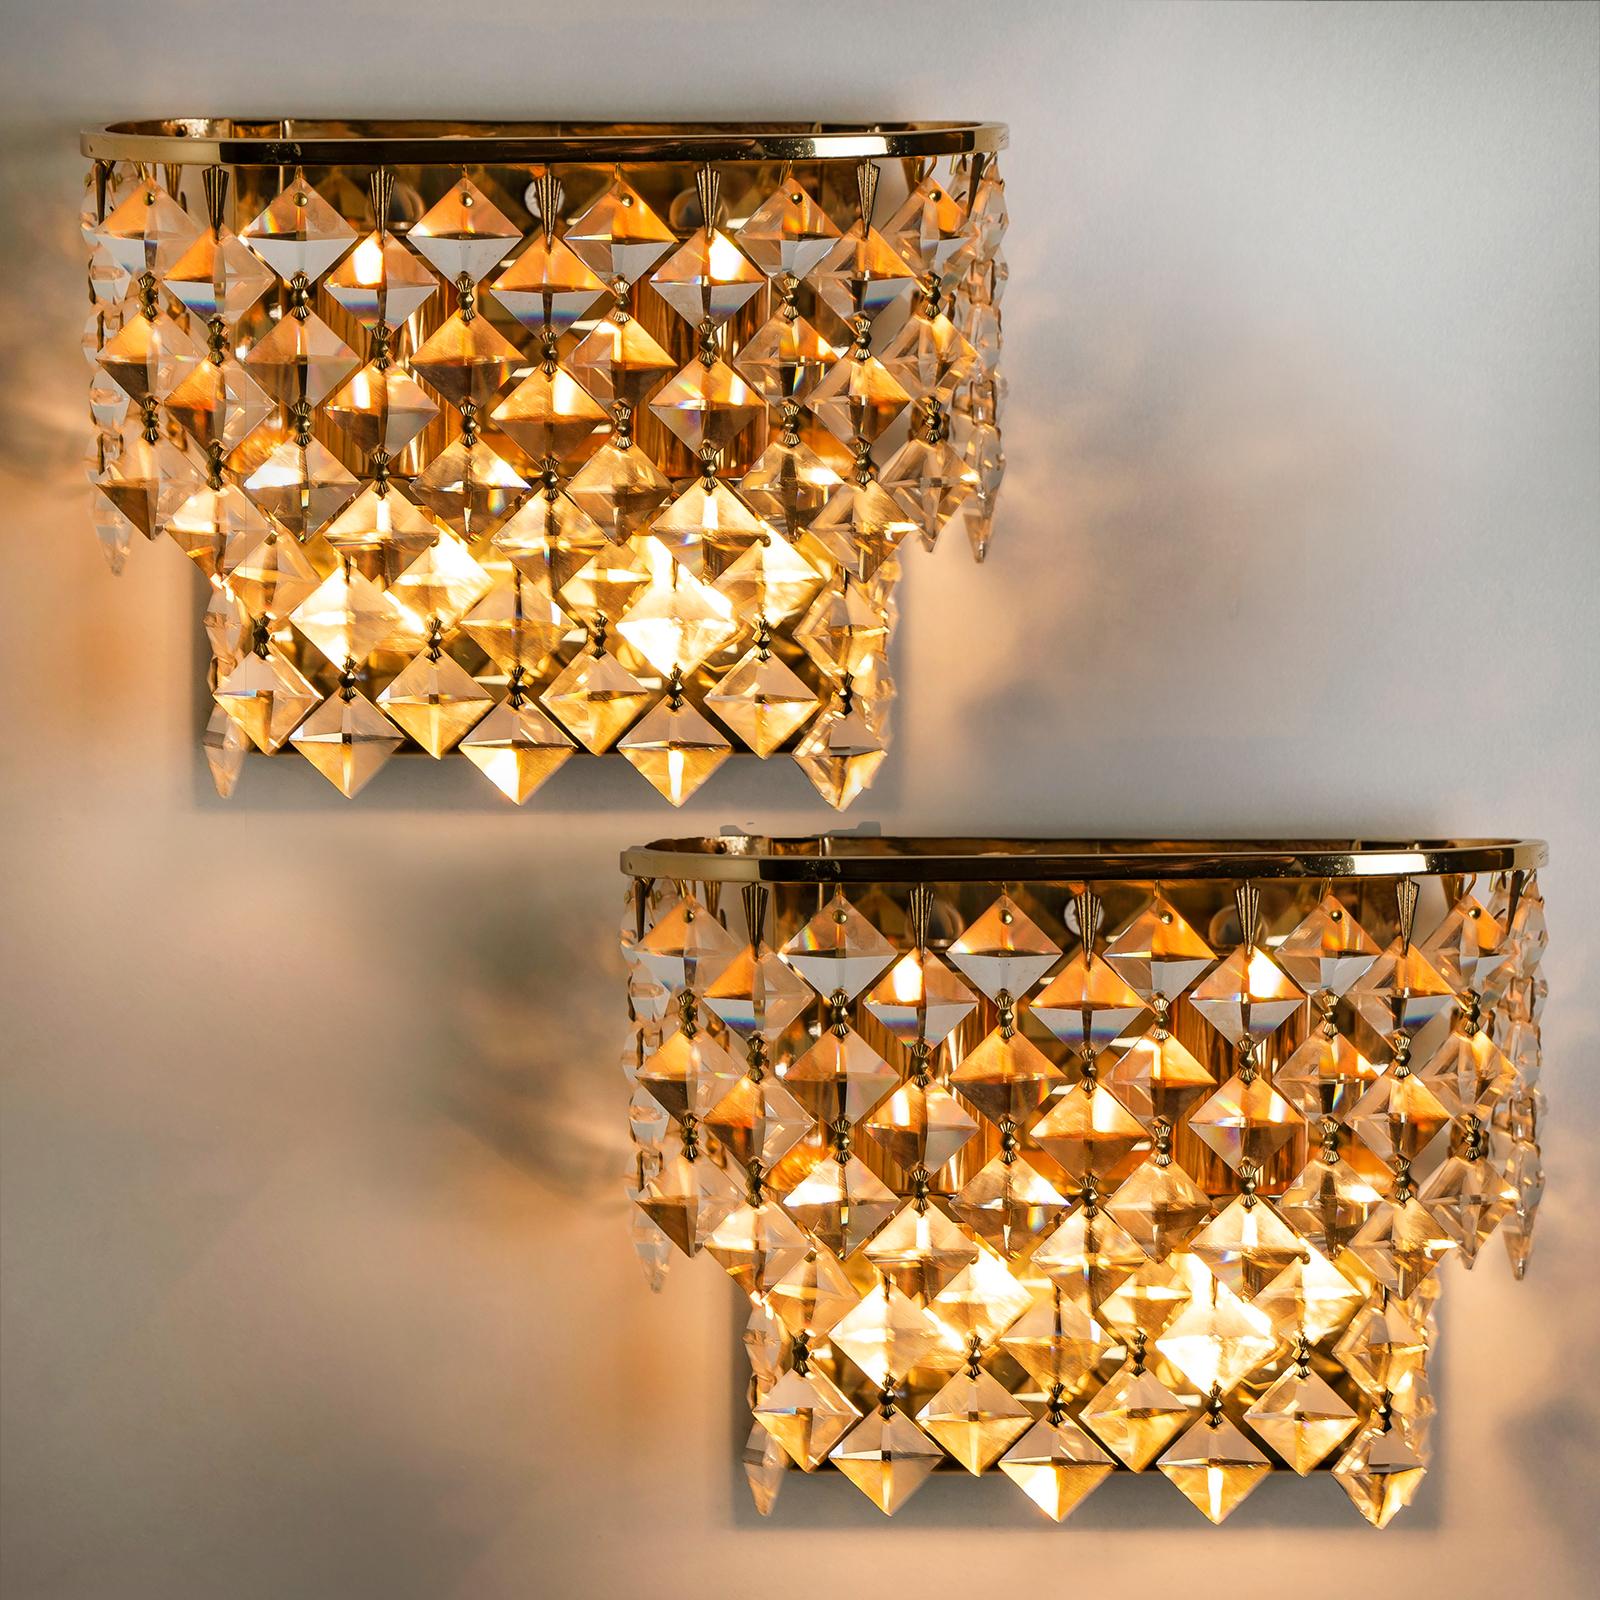 Beautiful pair of small Palwa wall sconces from the 1960s. Crystal square glass crystals in a lamp. The elegant and chic model is typical for Palwa, highest quality and best materials. Illuminators beautifully.

Very good condition, well- wired,